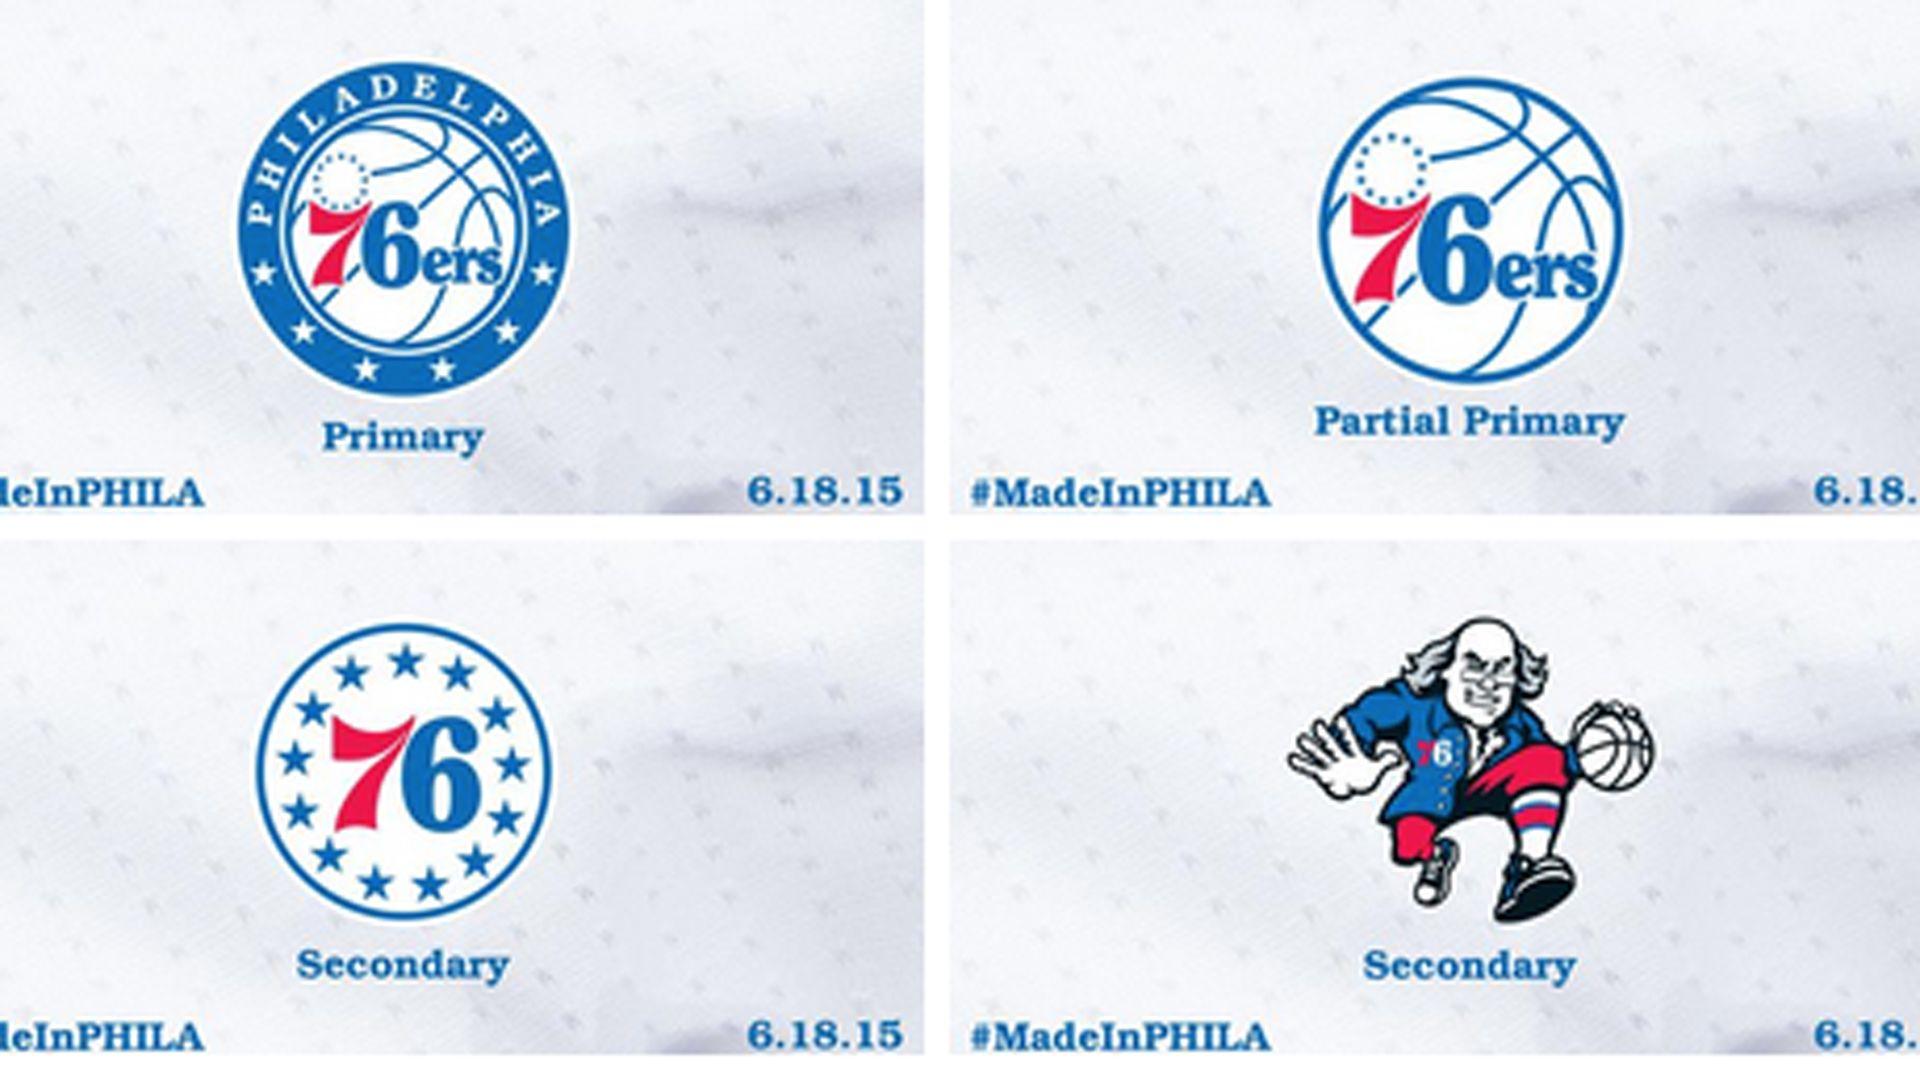 Sixers Logo - The 76ers new logo — round, starry, red, white and blue | NBA ...